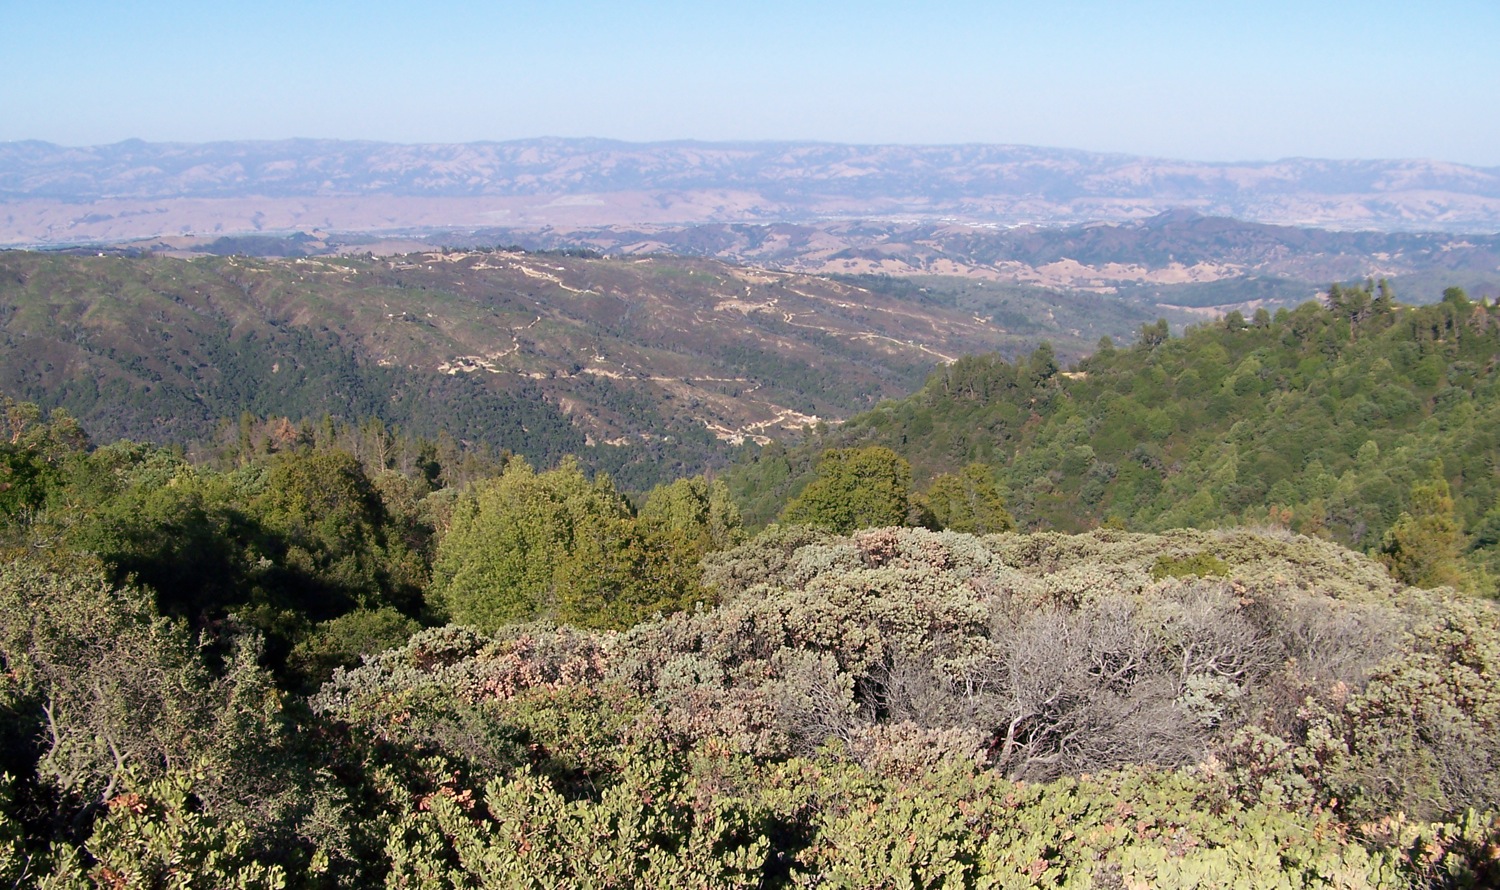 View of Gilroy area from near top of Loma Prieta